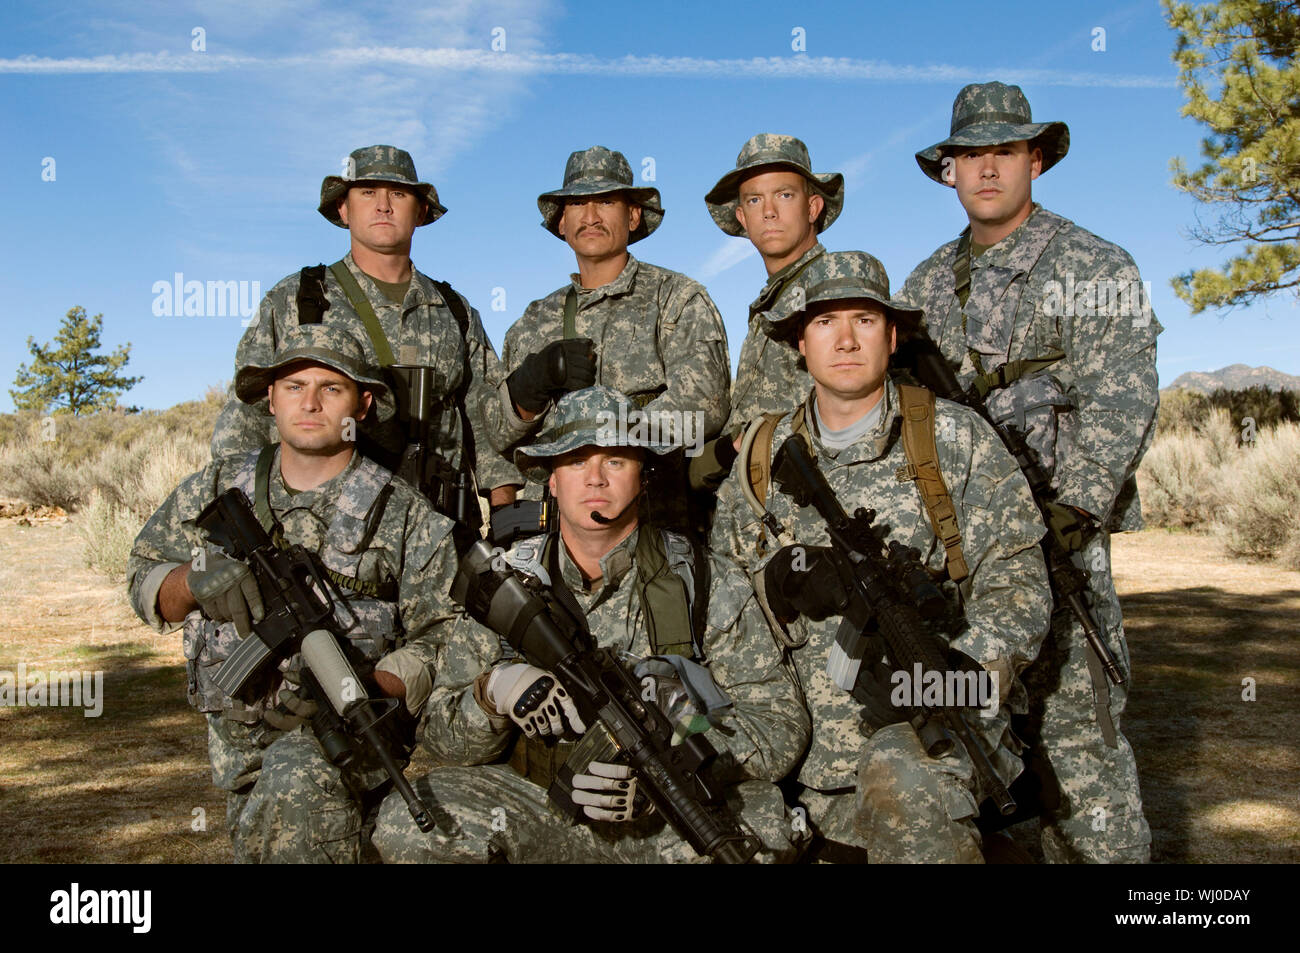 Group portrait of soldiers on field Stock Photo